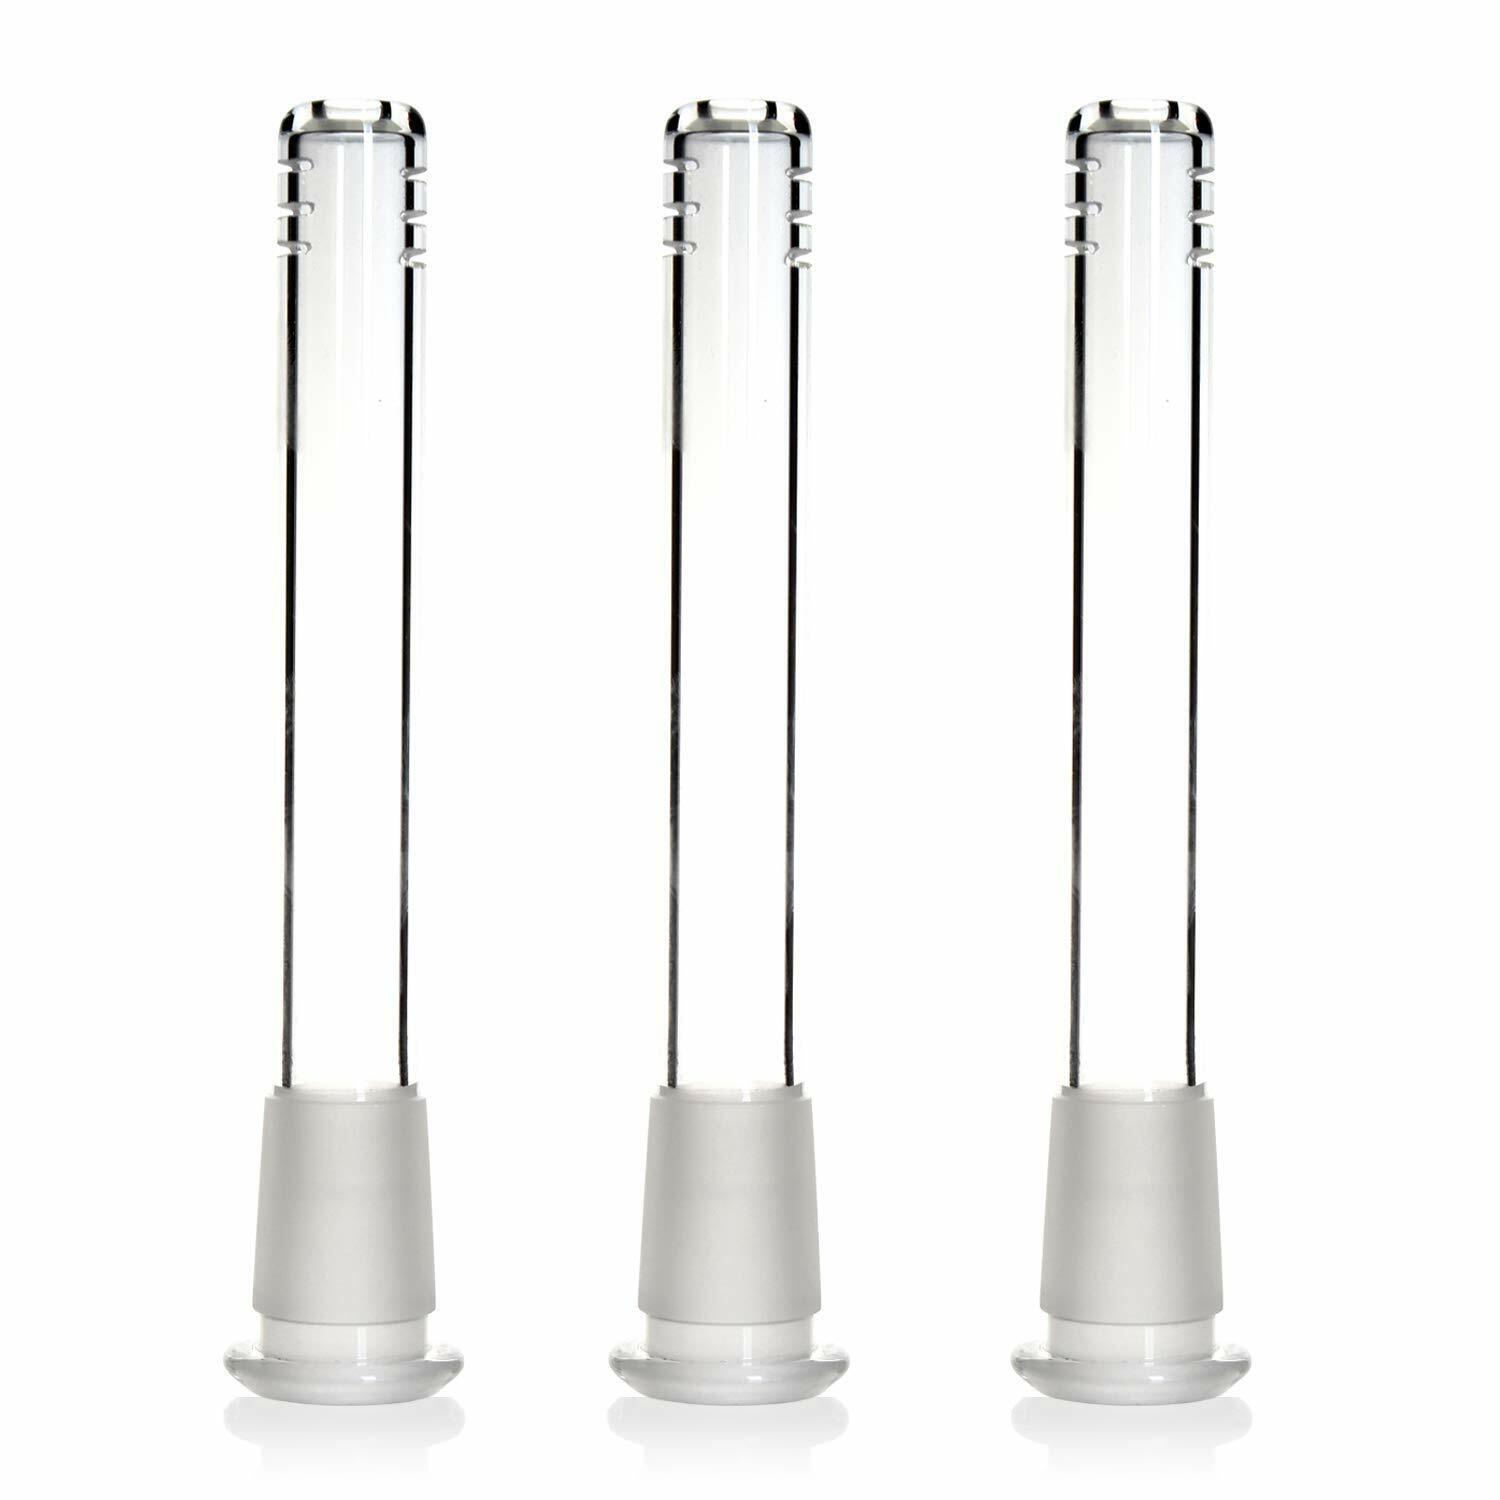 4.5 inches 18mm by 14mm Stem Clear Scientic Glass Tube Downstem Adapter 3pcs